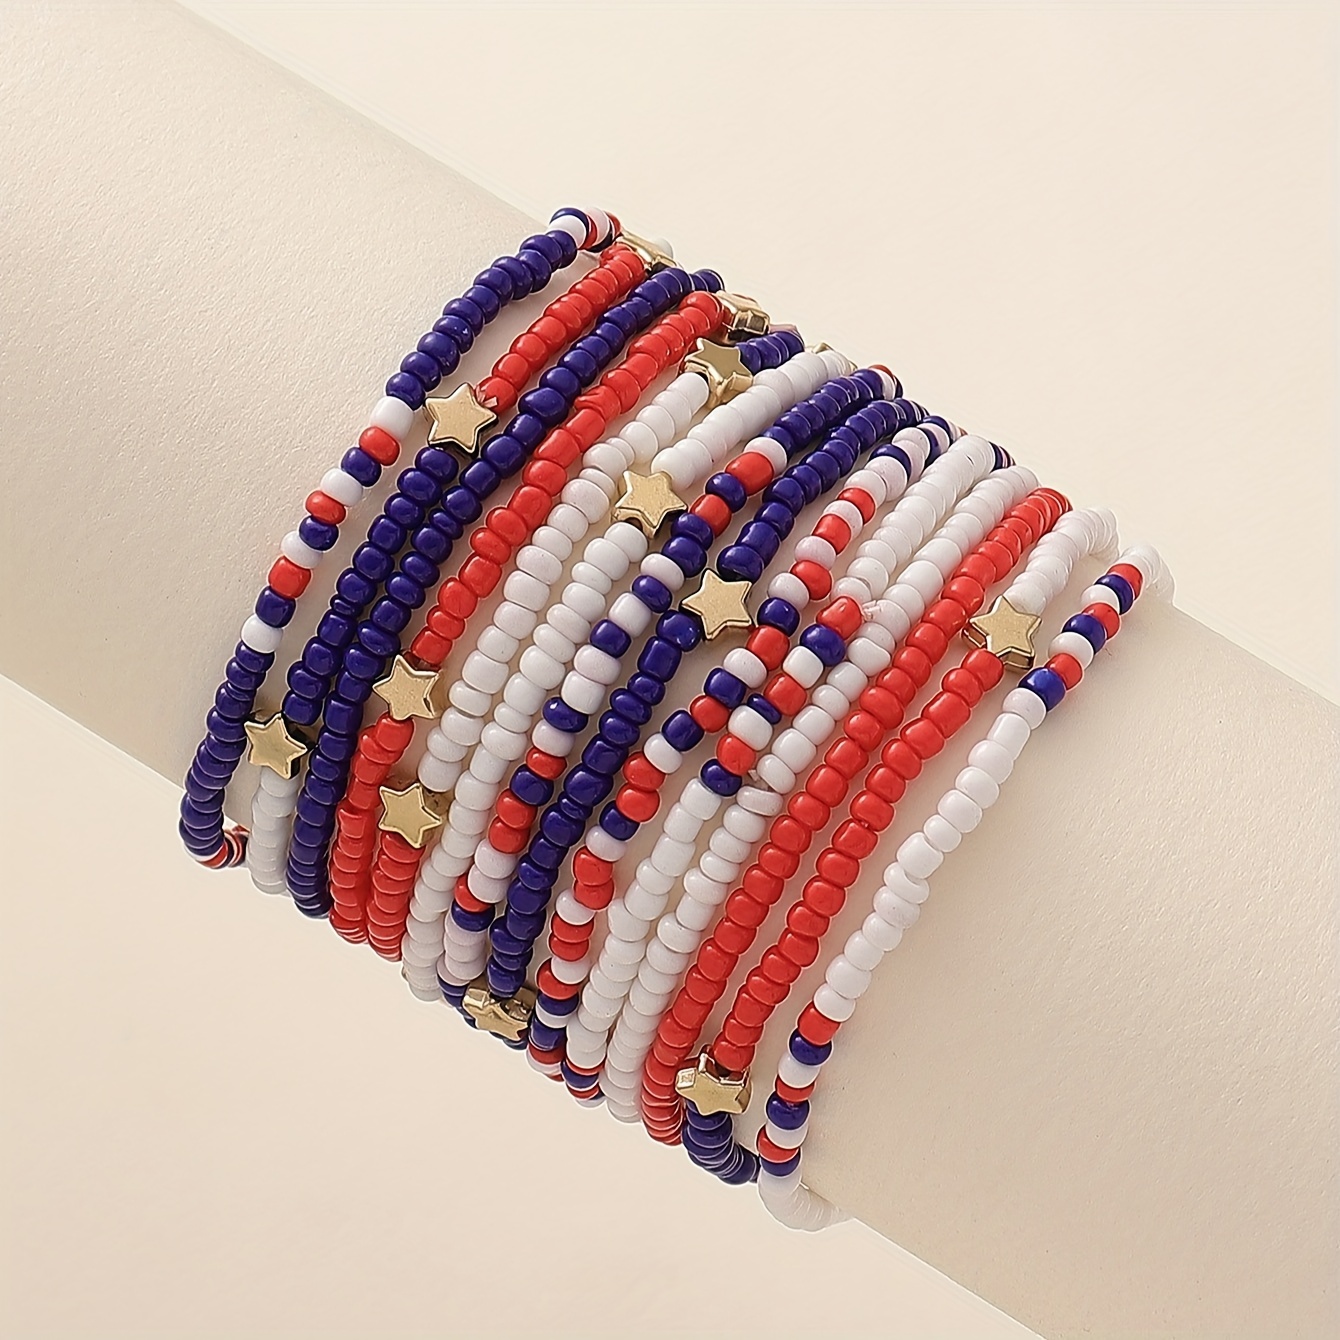 

14pcs Patriotic Beaded Bracelet Set, Red White And Blue Stretch Beads With Star Charms, Boho Style, Holiday Perfect For Ladies' Events And Parties